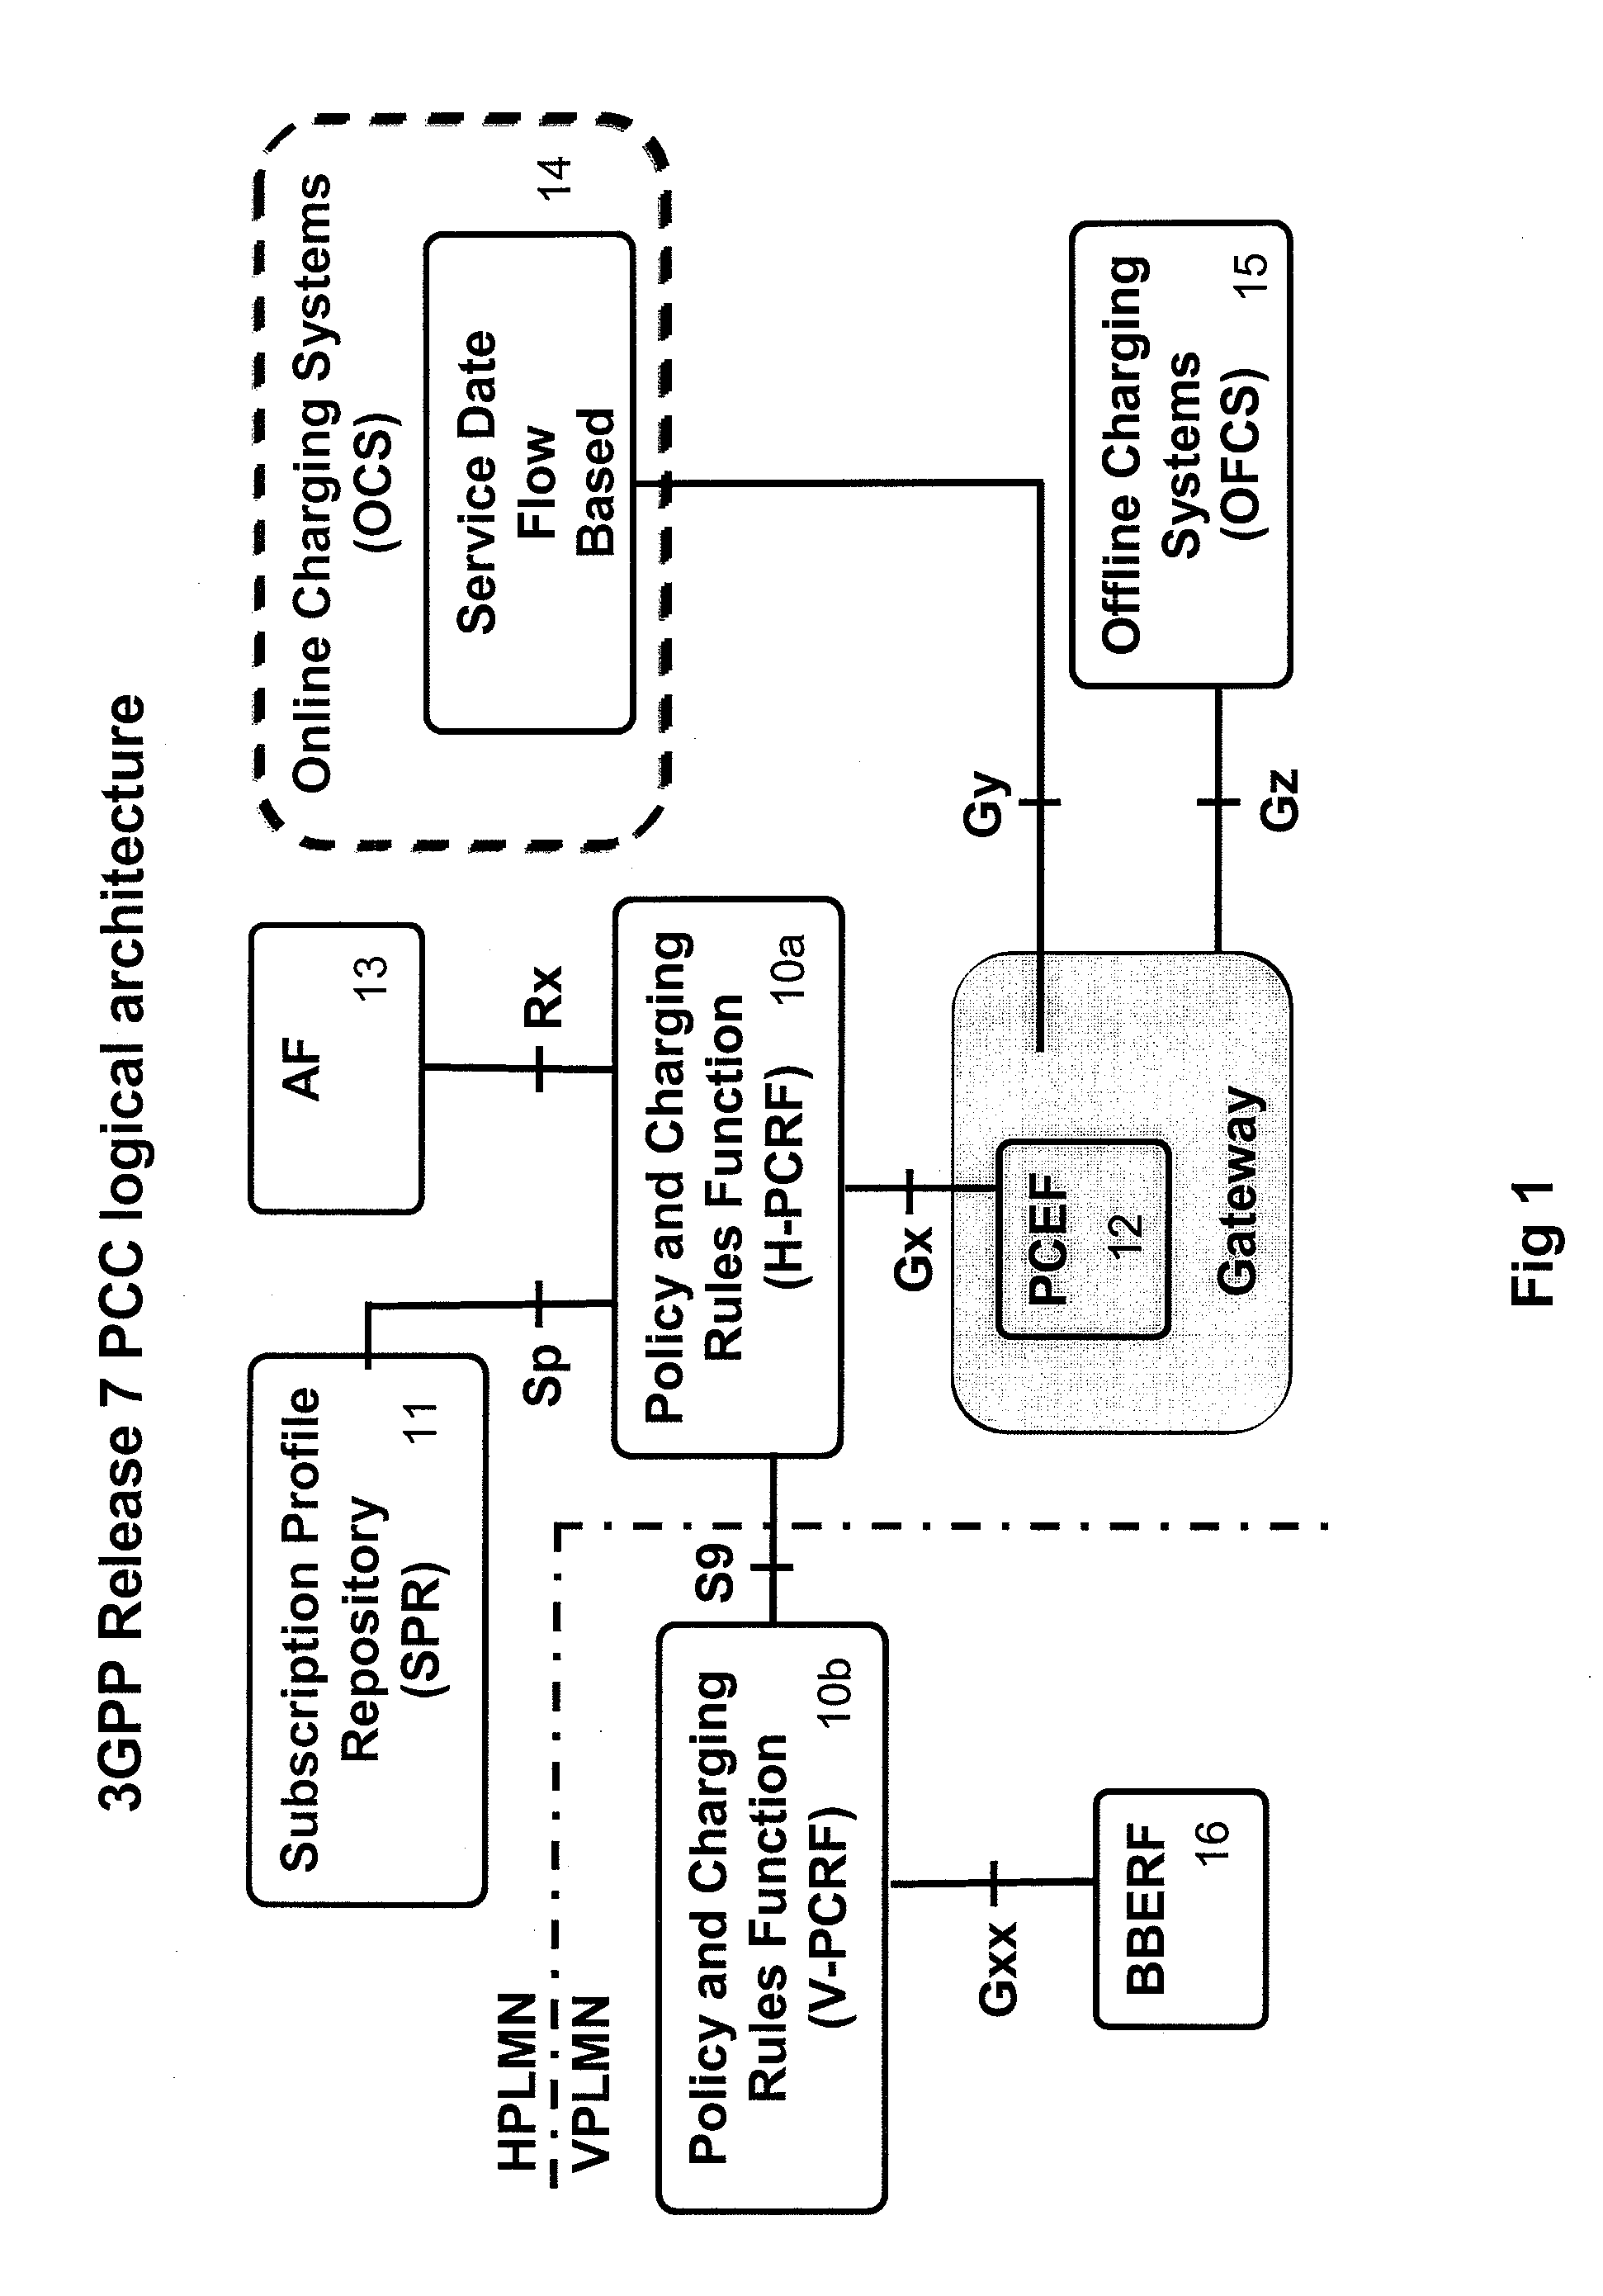 Controlling subscriber usage in a telecommunications network